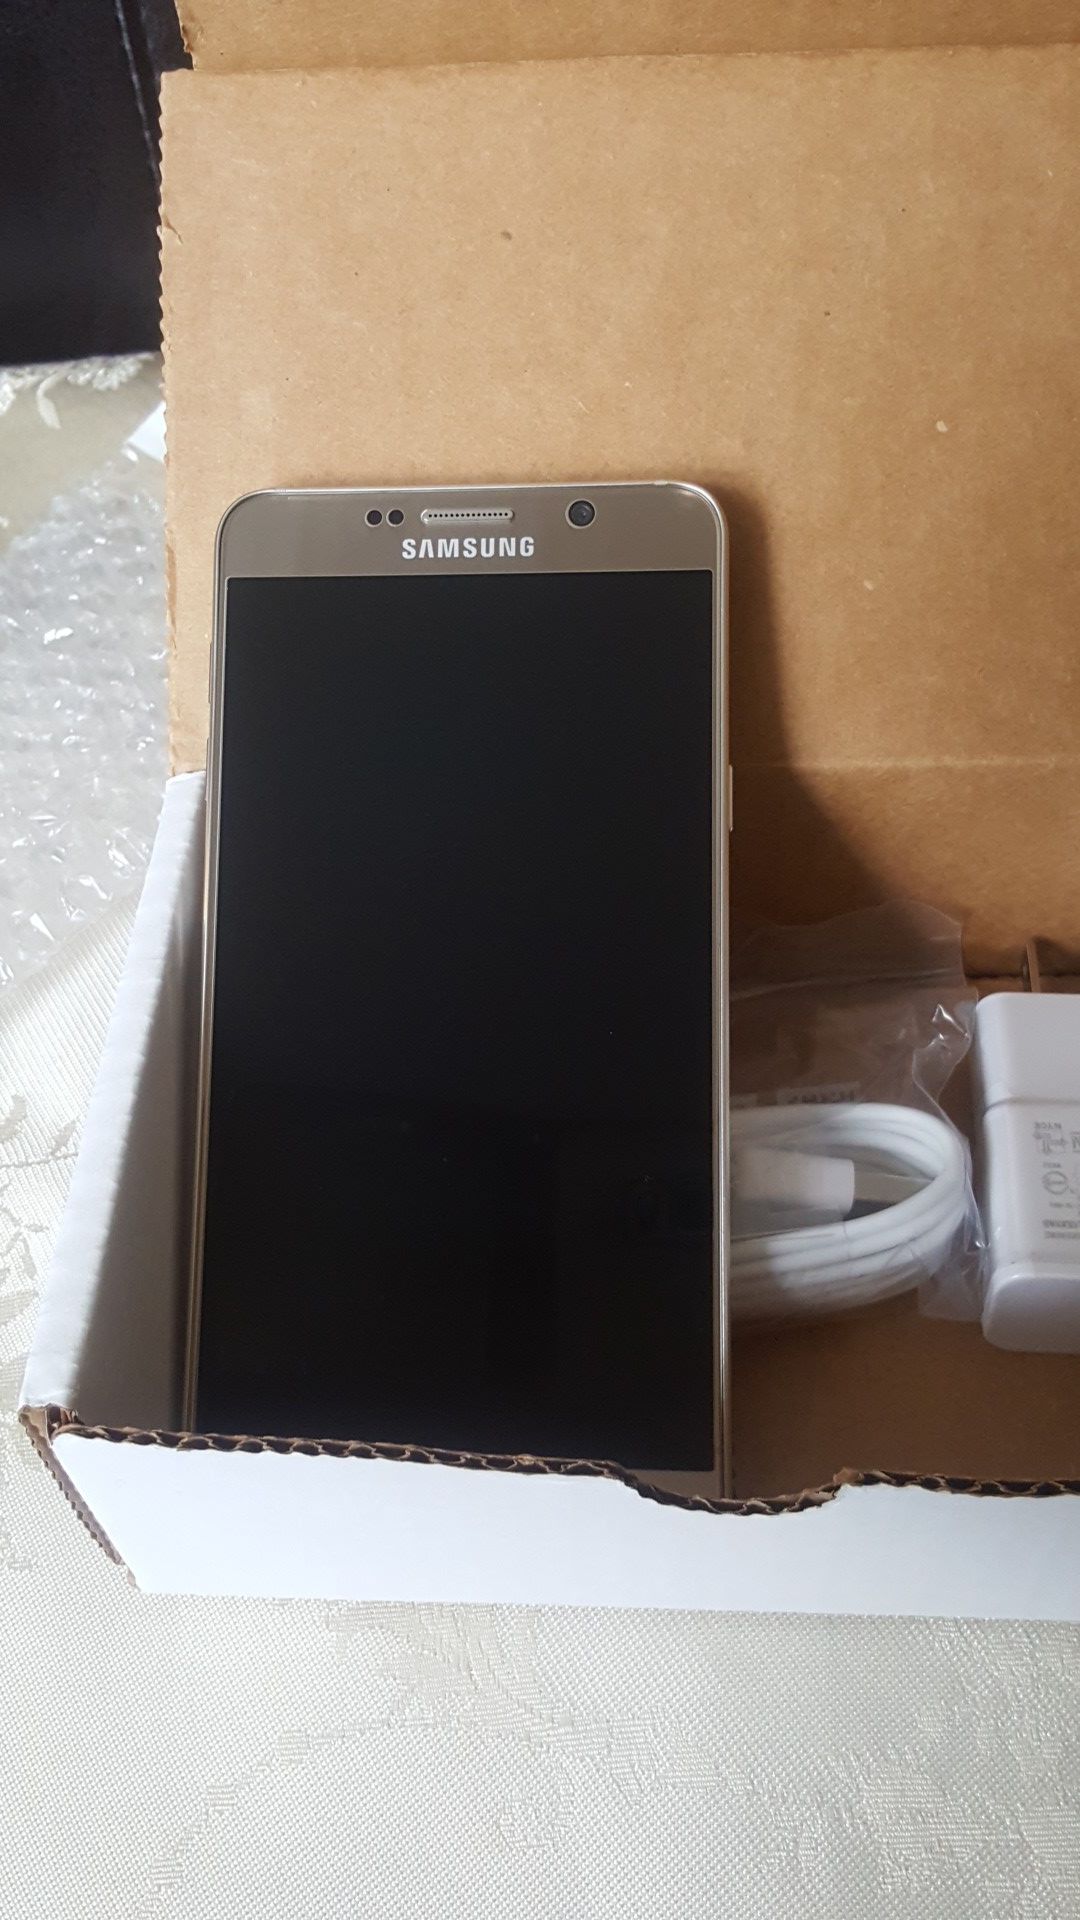 Samsung galaxy note 5 32gb Gold T mobile.